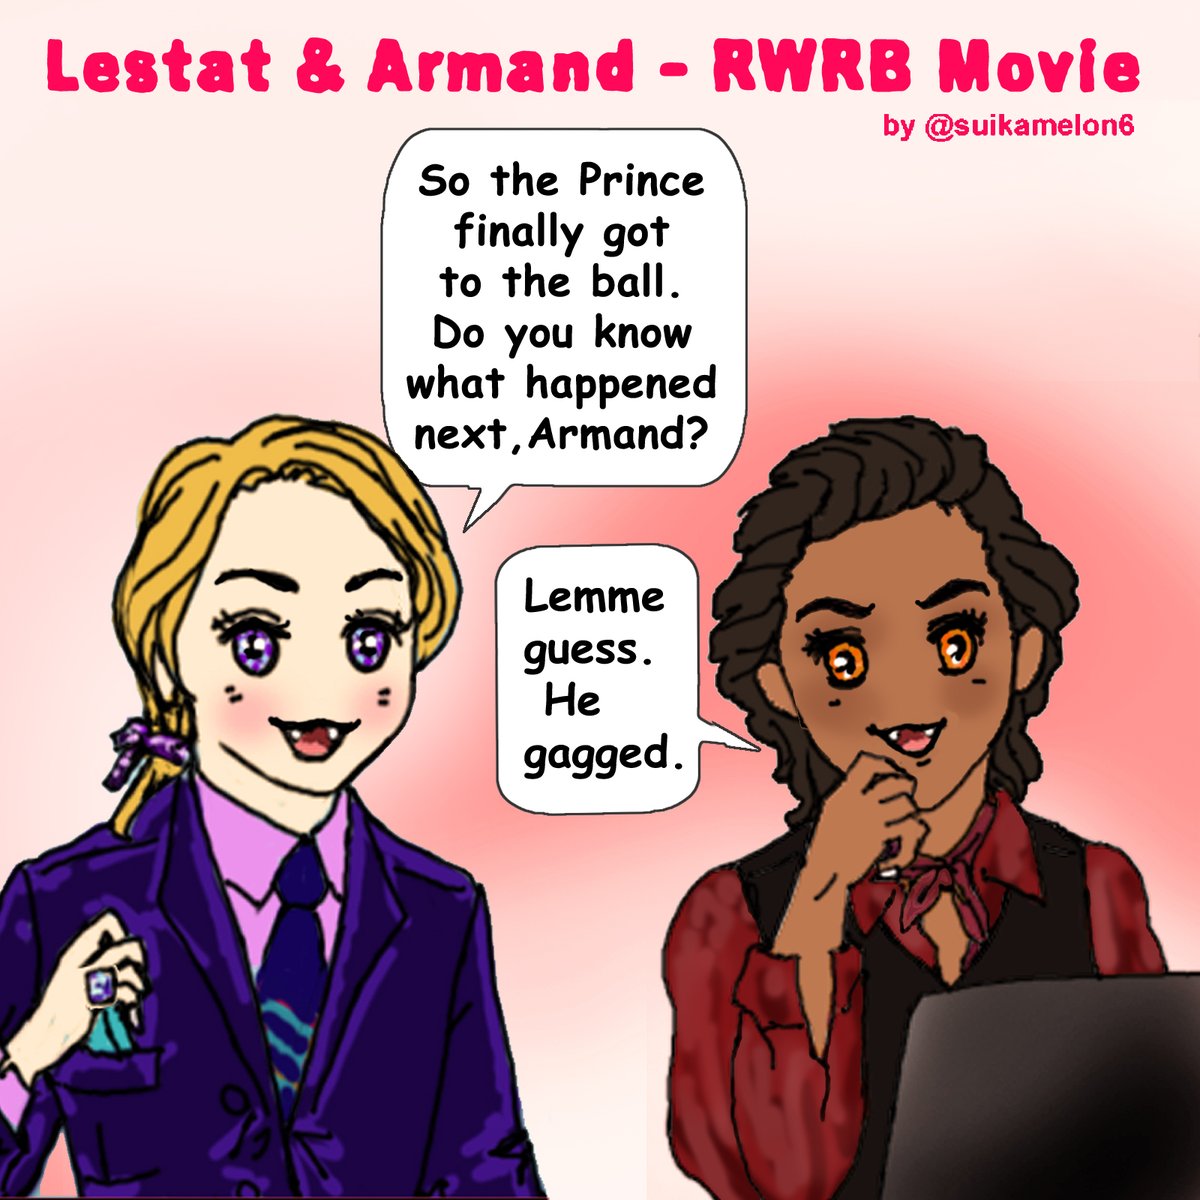 Lestat's trying to sell that movie to Armand.

#Lestat #Armand #iwtvfunny #dirtyjokes #iwtvcomic #gag